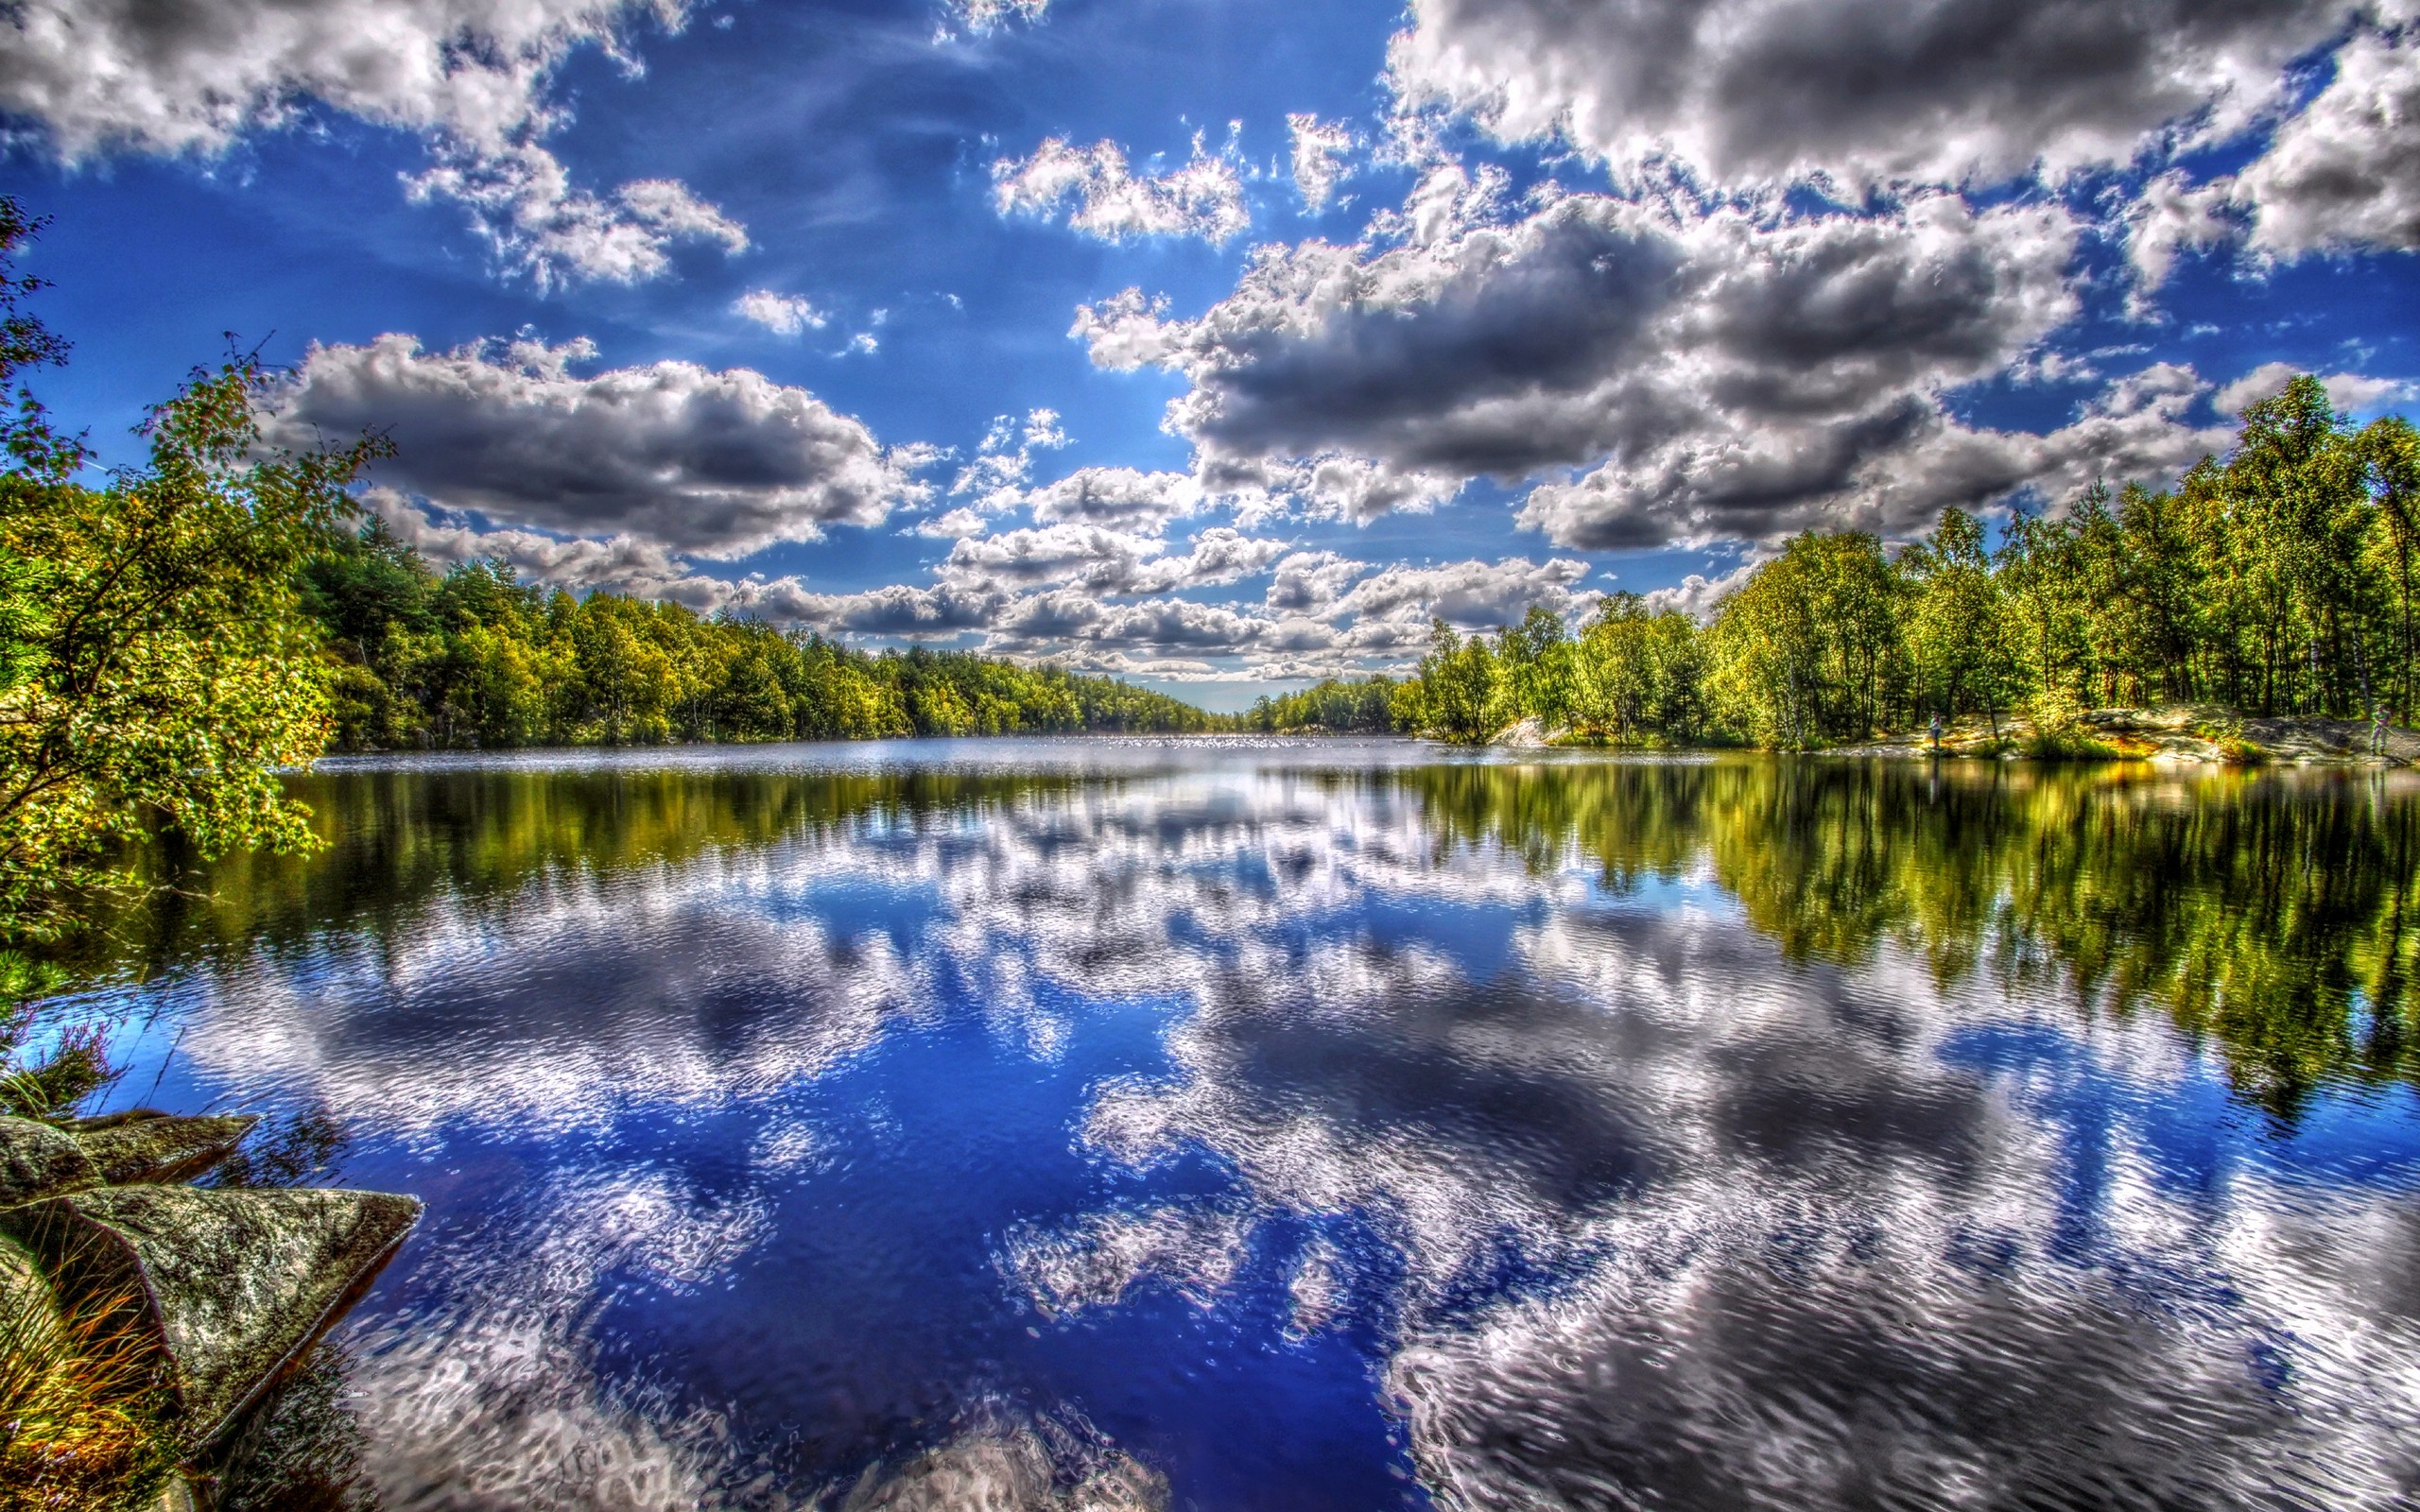 General 2560x1600 reflection nature sky clouds water